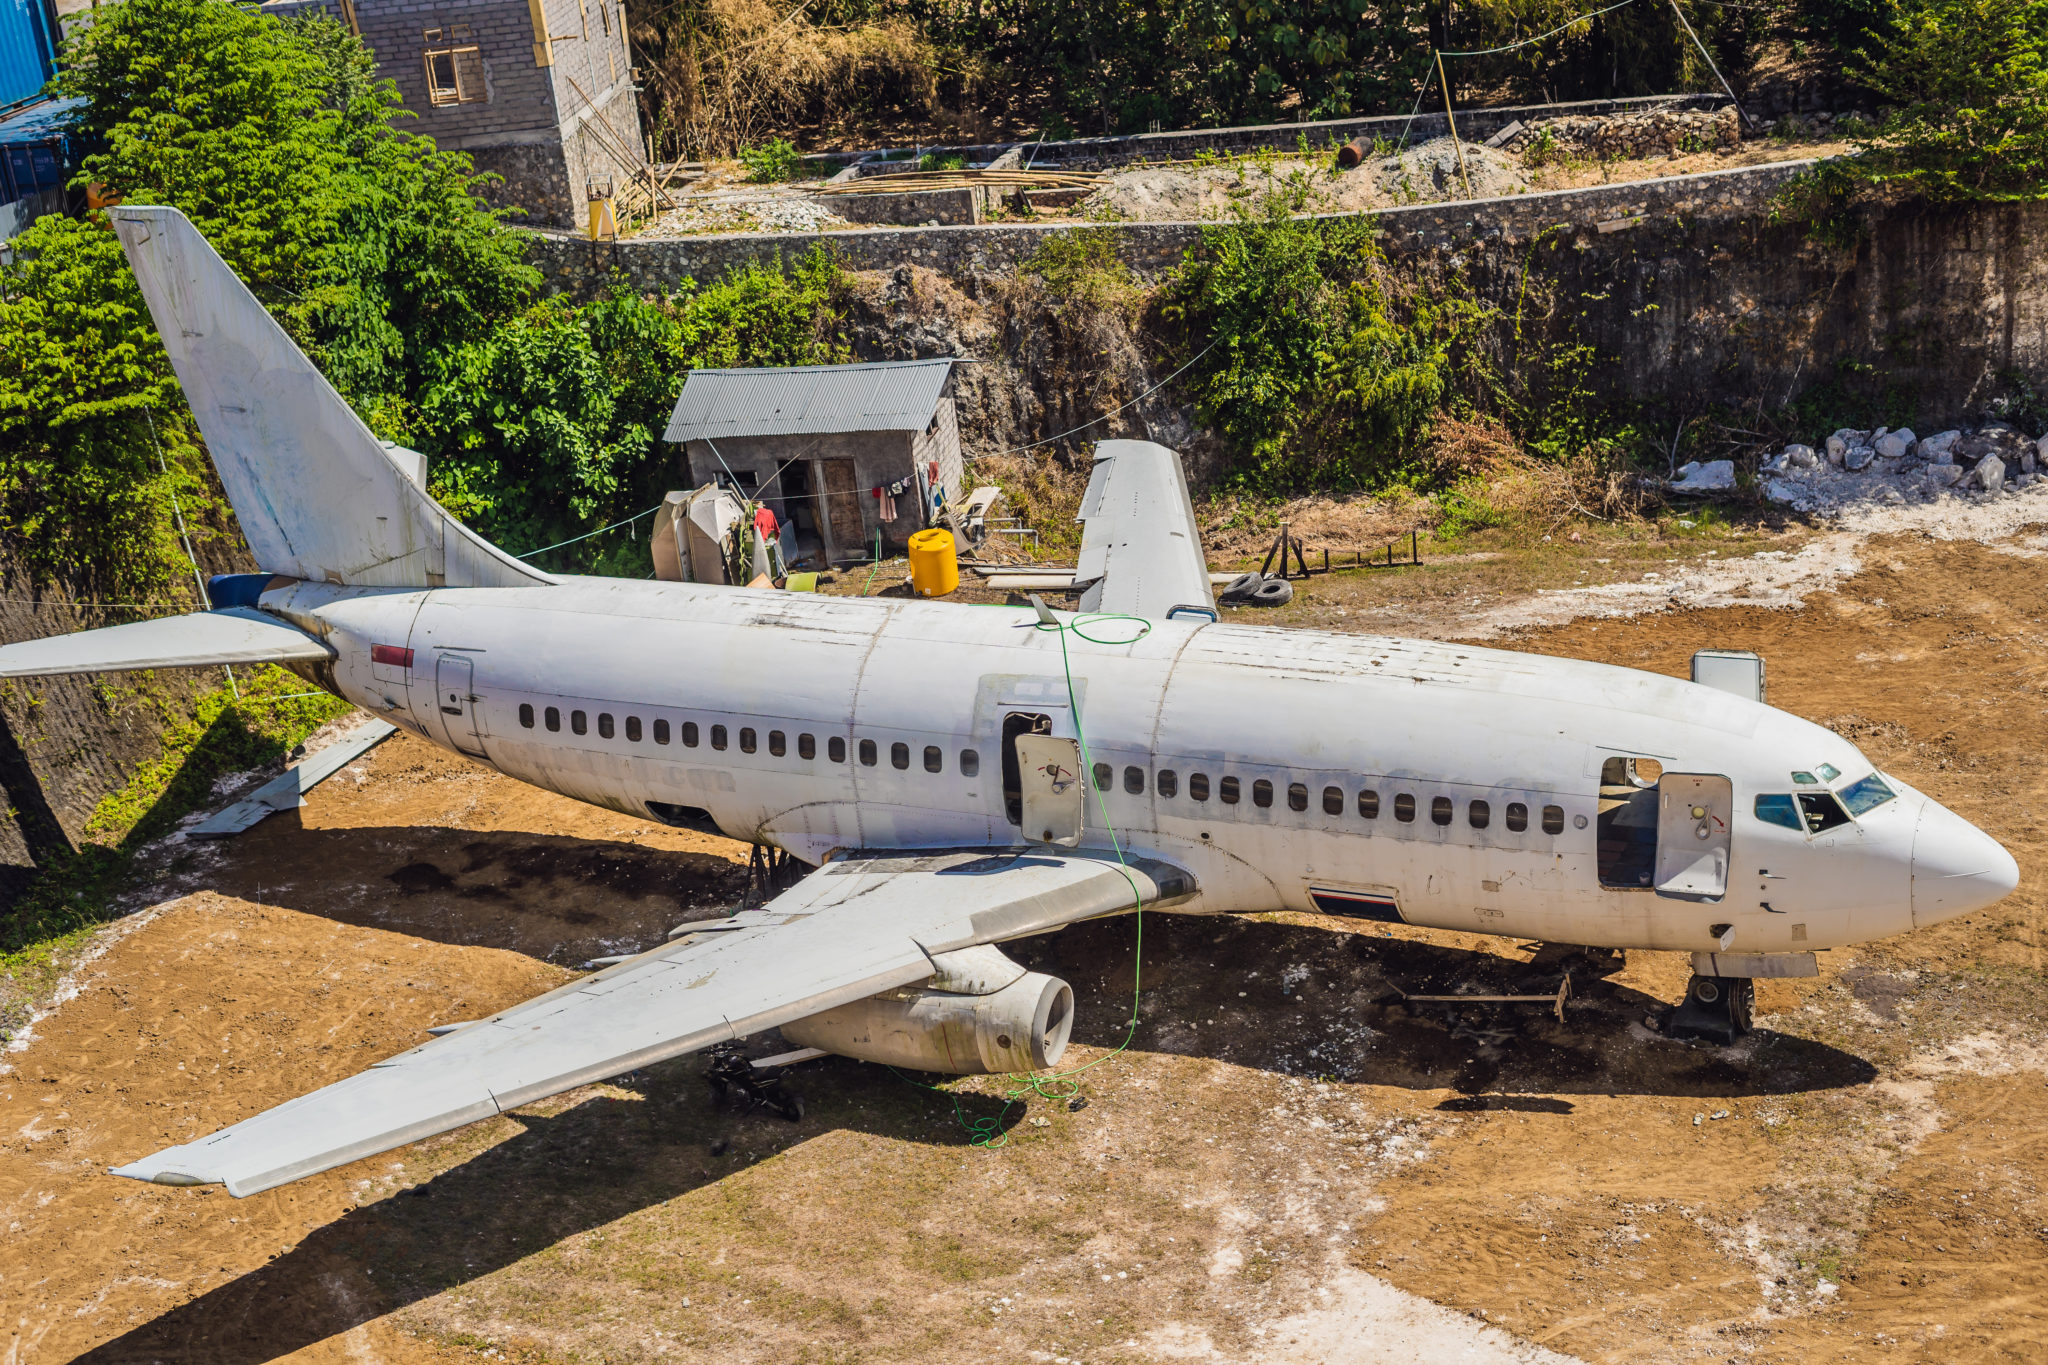 An old passenger aircraft on aviation waste.